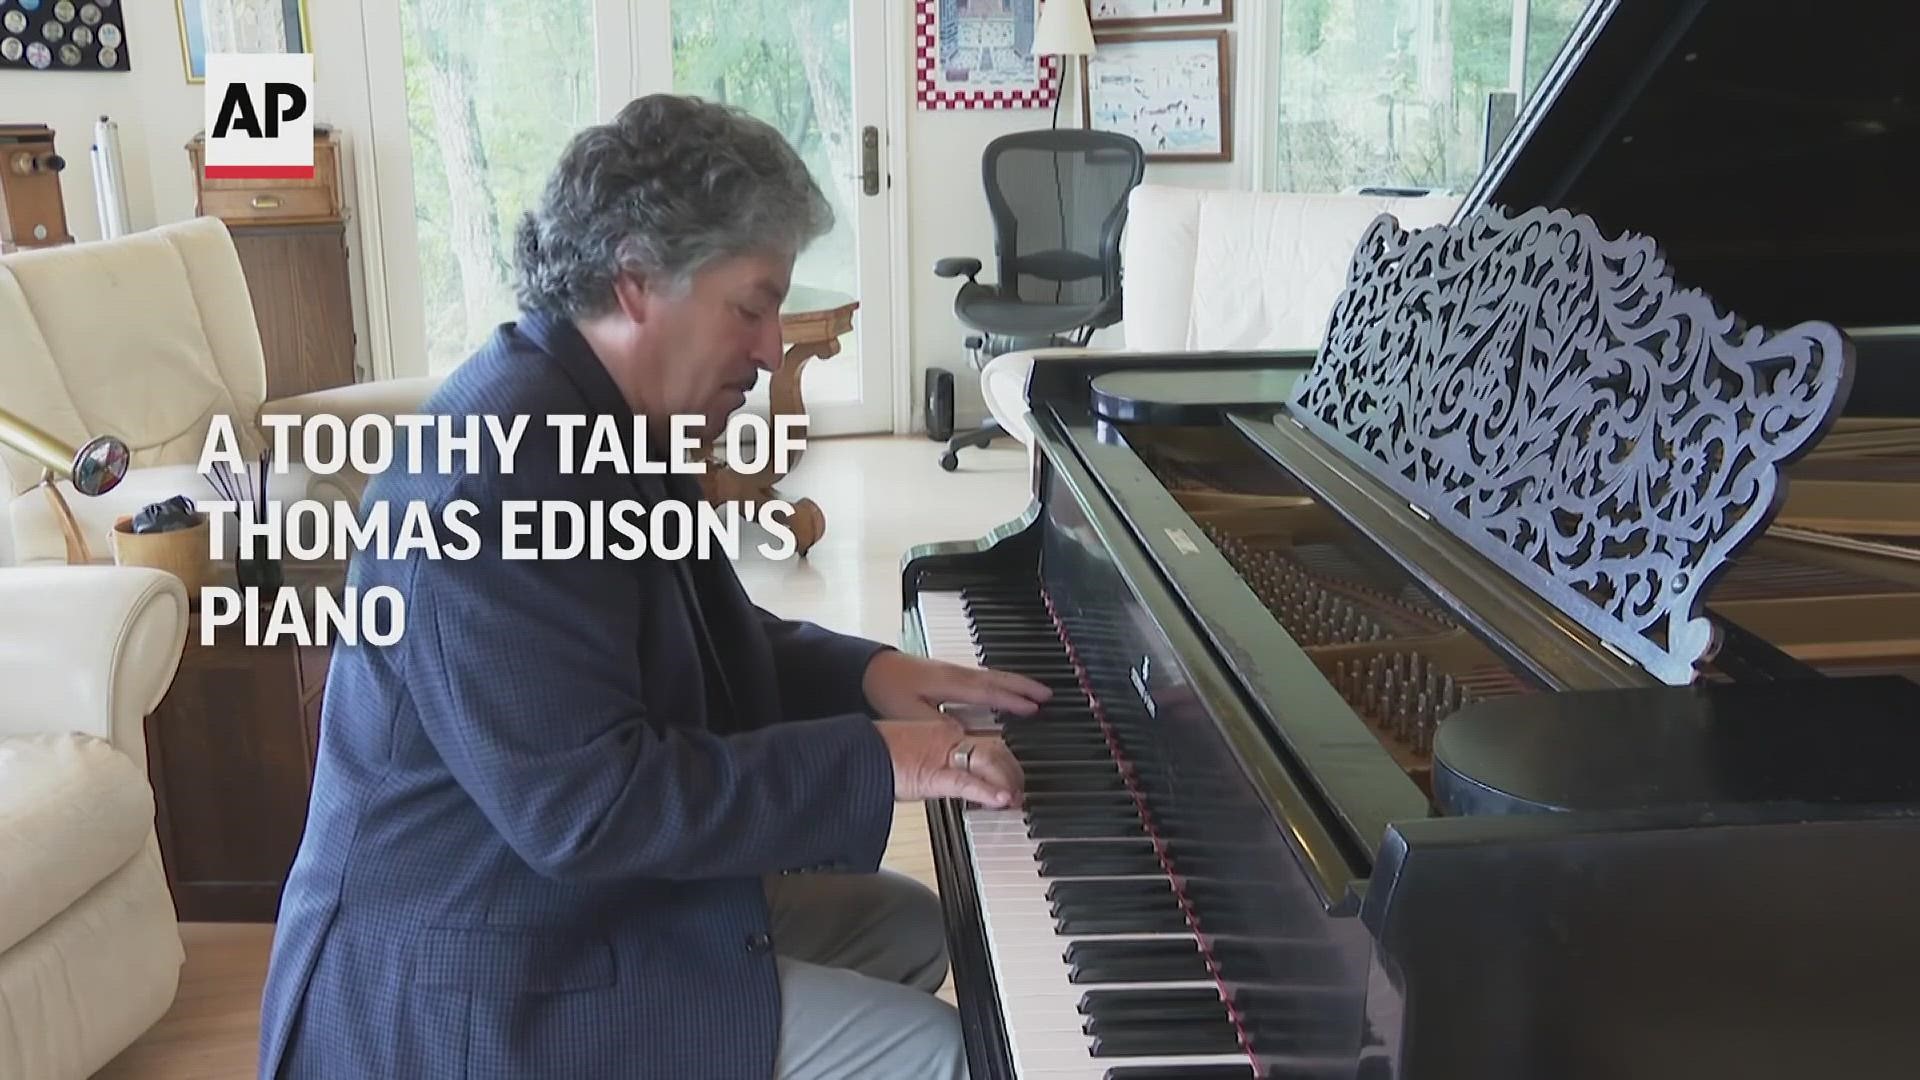 Hard of hearing, Thomas Edison found a unique way to appreciate piano music. This piano may still have the marks.